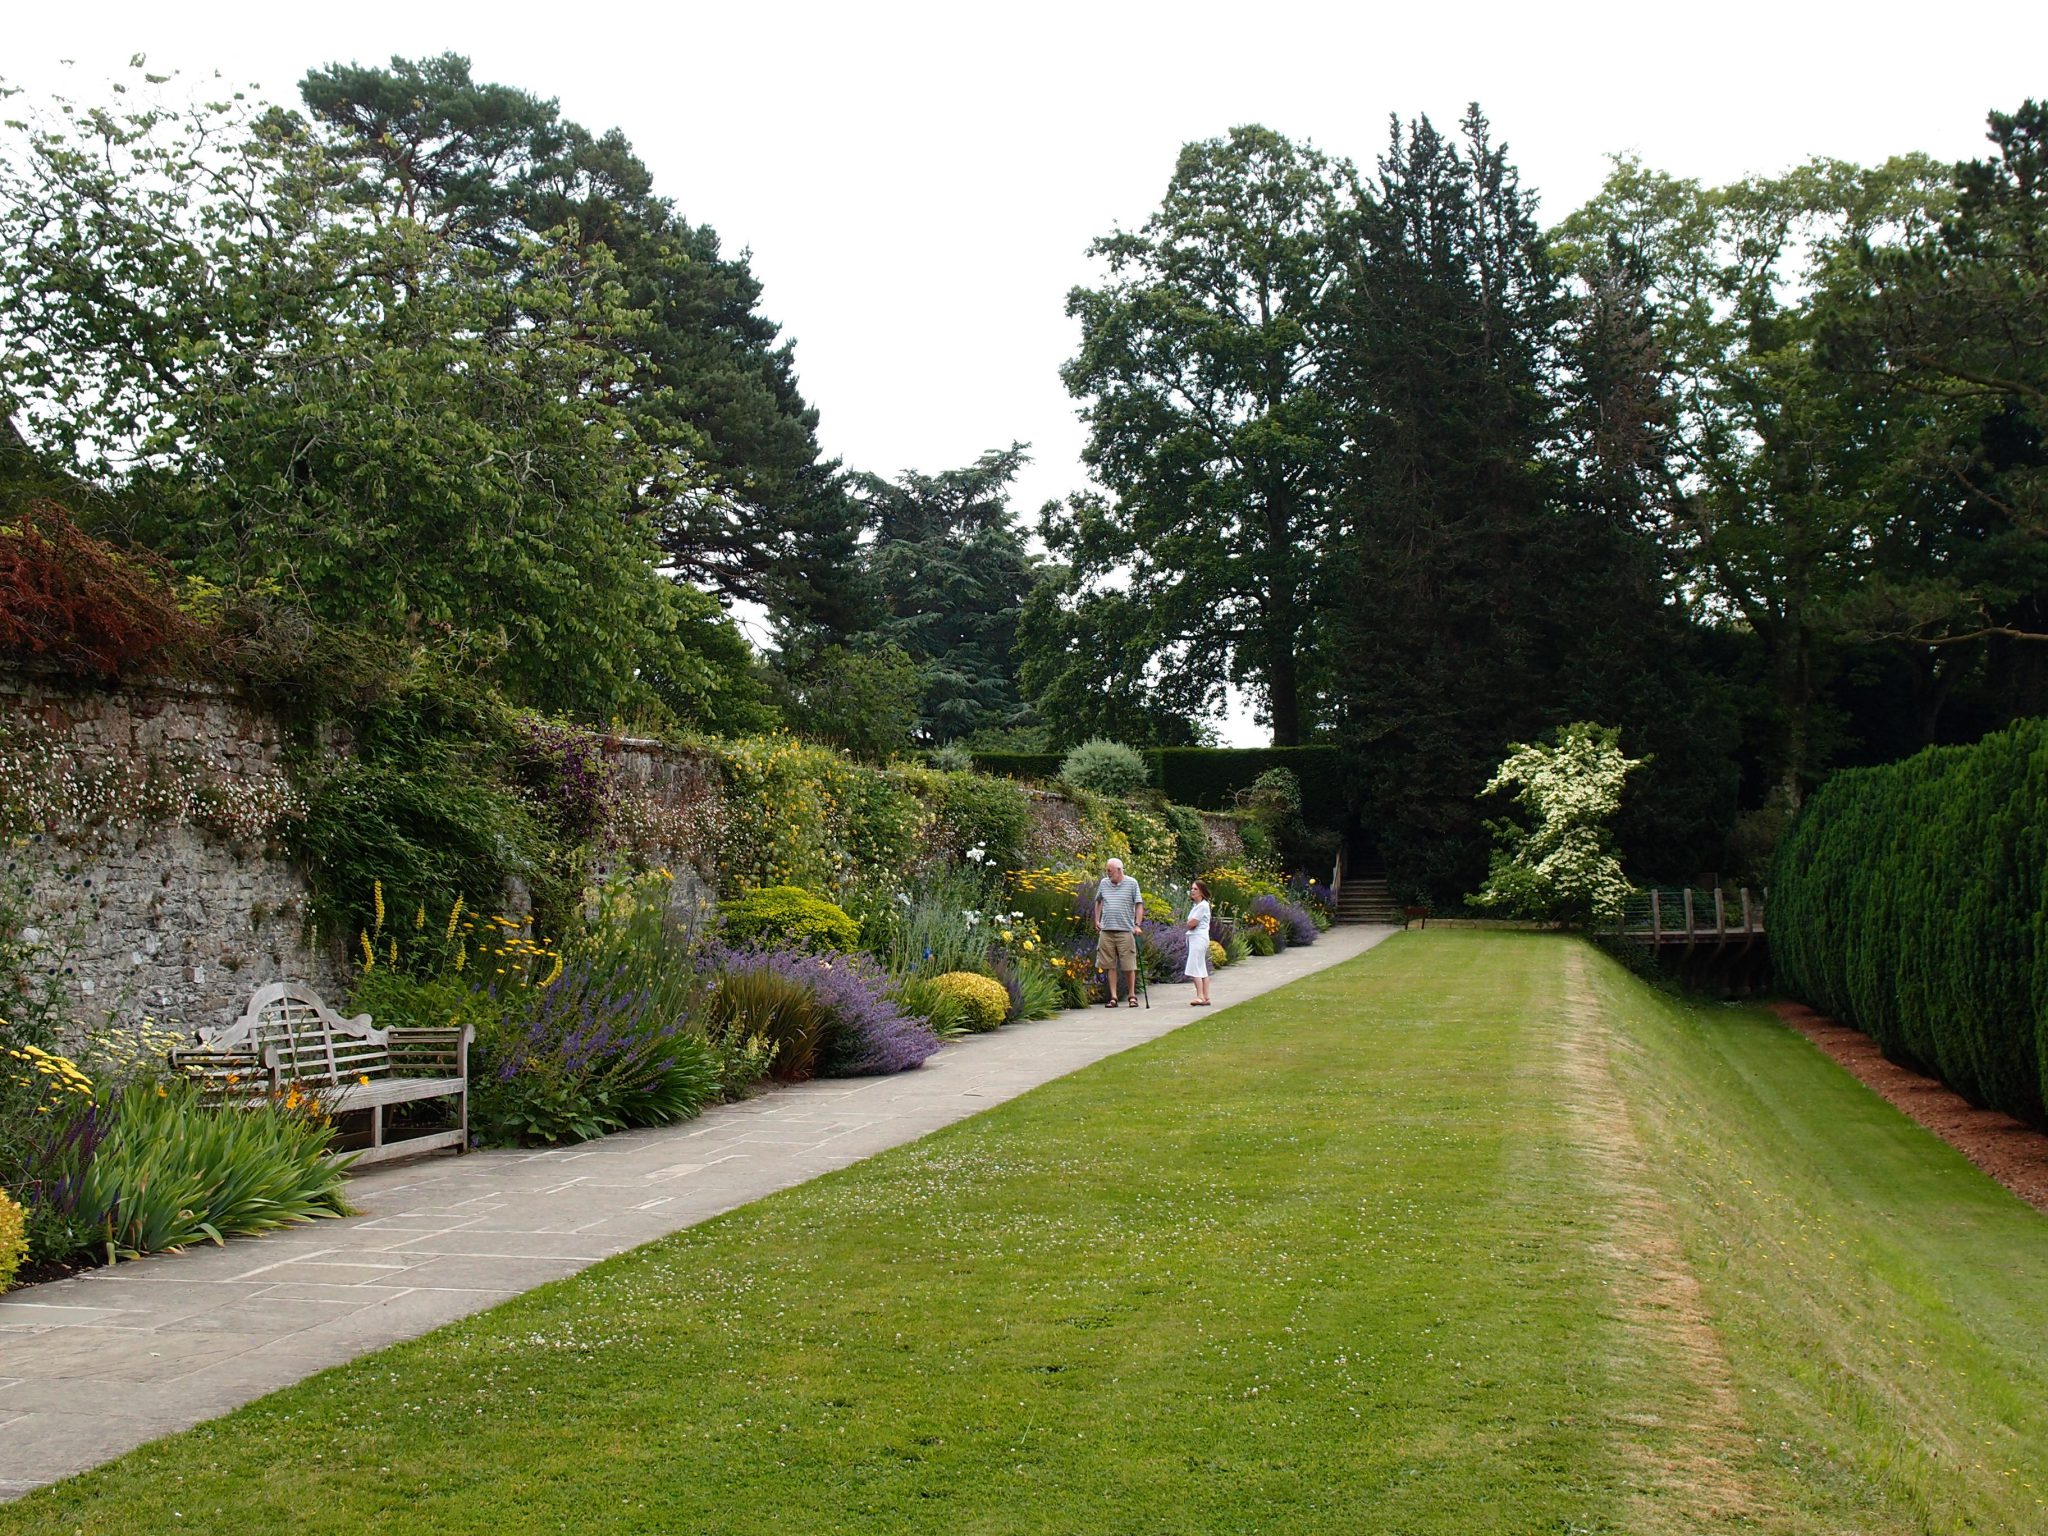 On the left: the Sunny Border. To the rear, right: the line of highly-sculptural Irish Yews, which are called the Twelve Apostles.